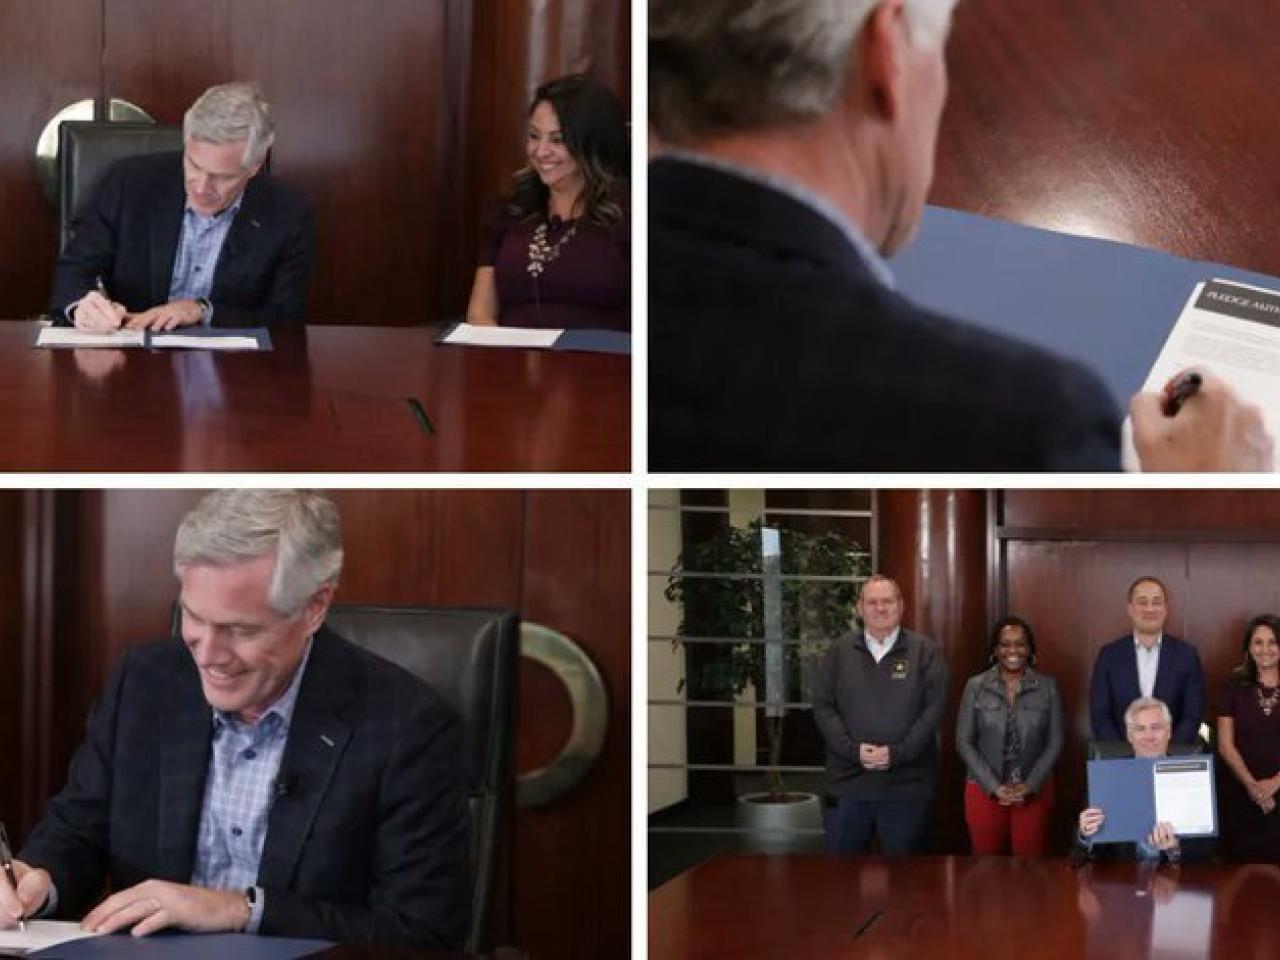 Collage of four photos of the CEO seated, signing a document at a large wood desk. A group of 5 people behind them.